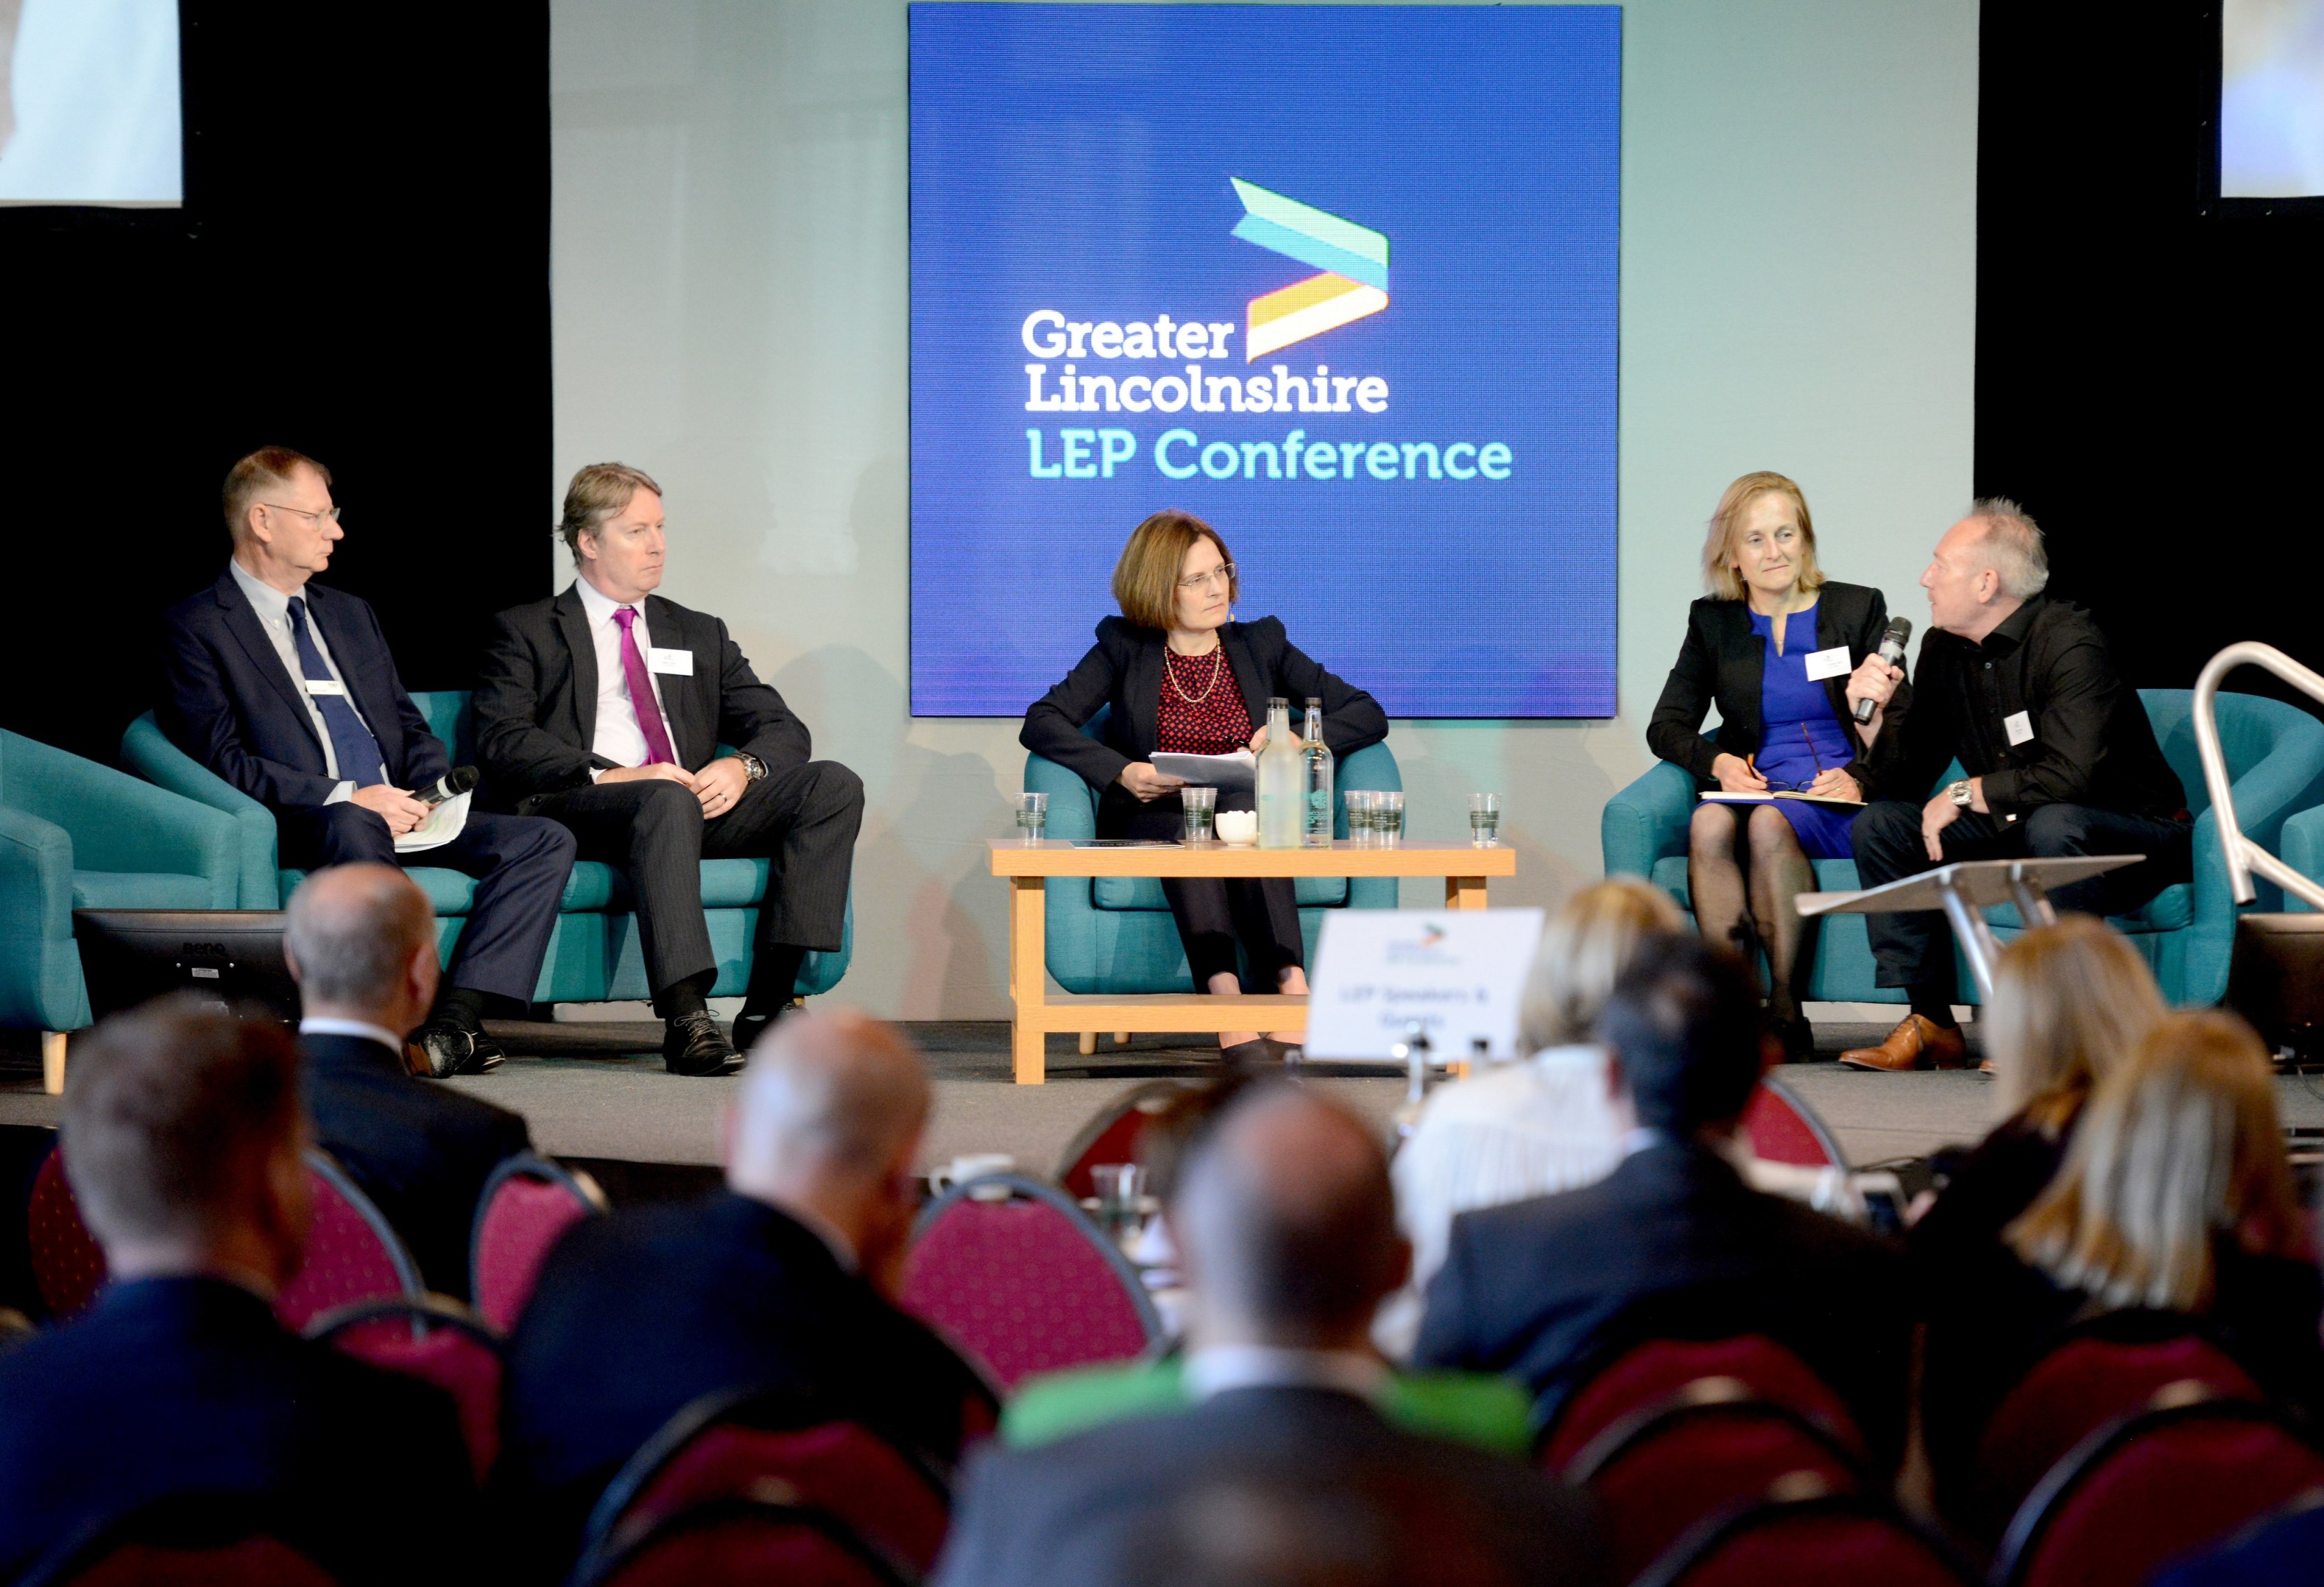 Large group of people sat down at an event listening to a Greater Lincolnshire LEP Conference Panel presentation